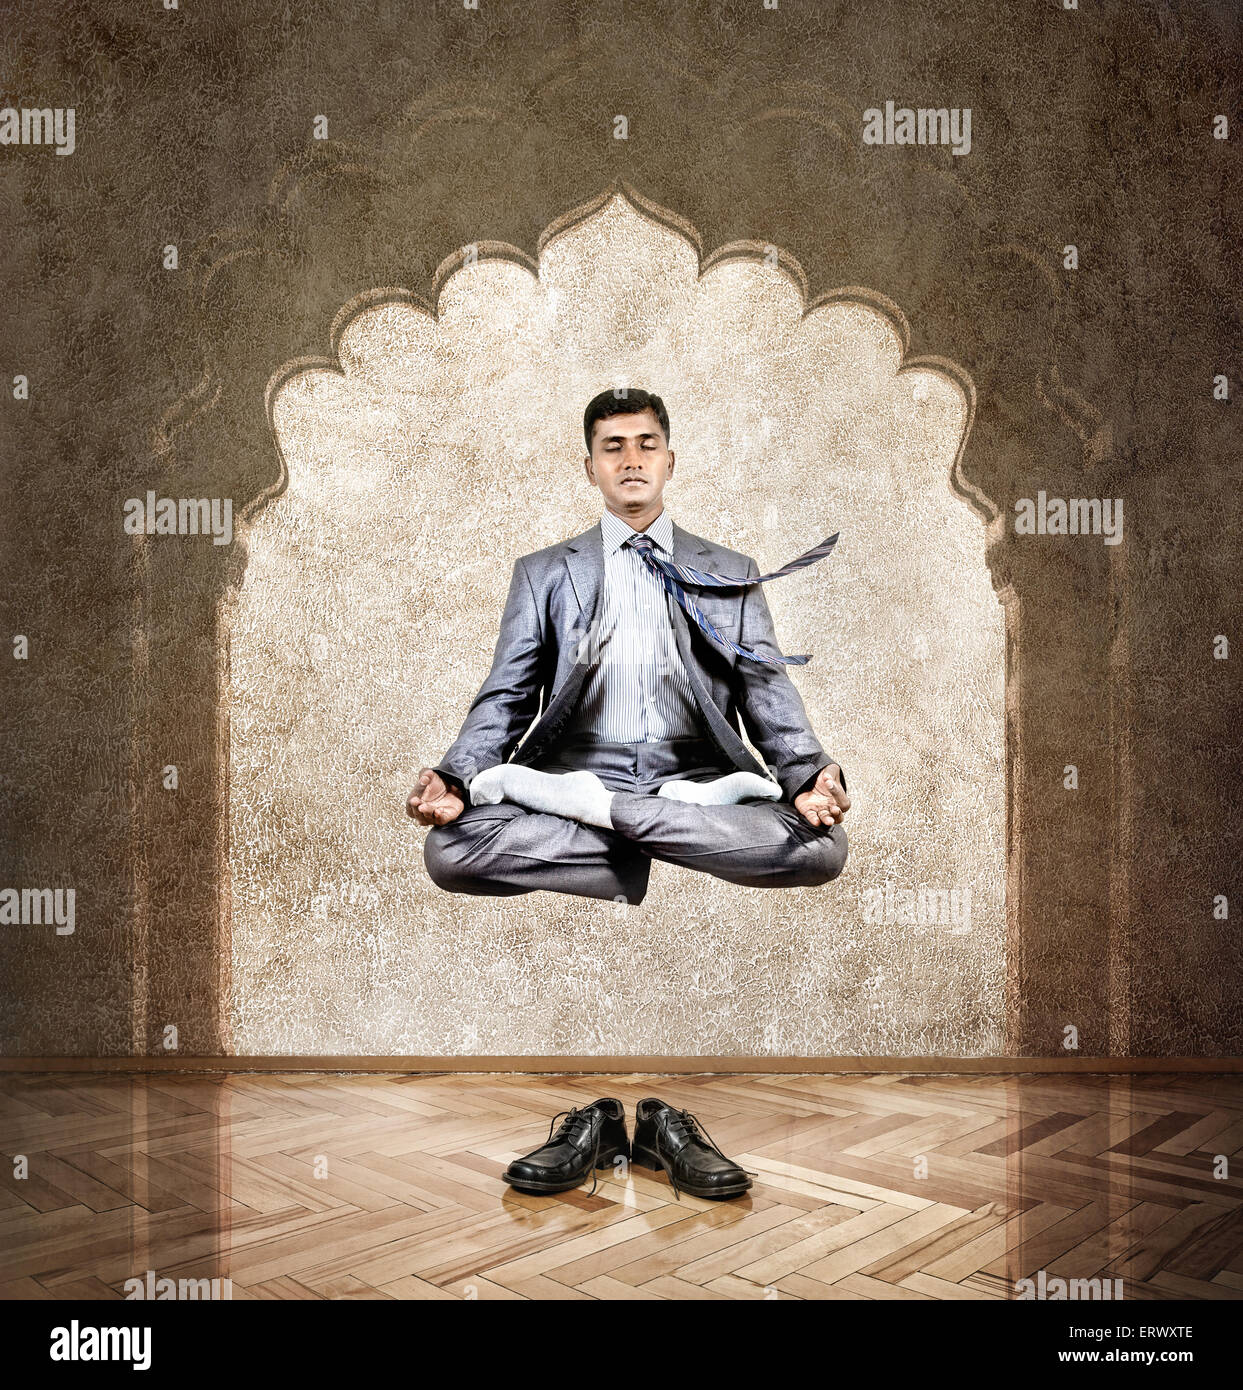 Indian businessman doing meditation in the air in lotus pose at the office with arch on the wall Stock Photo